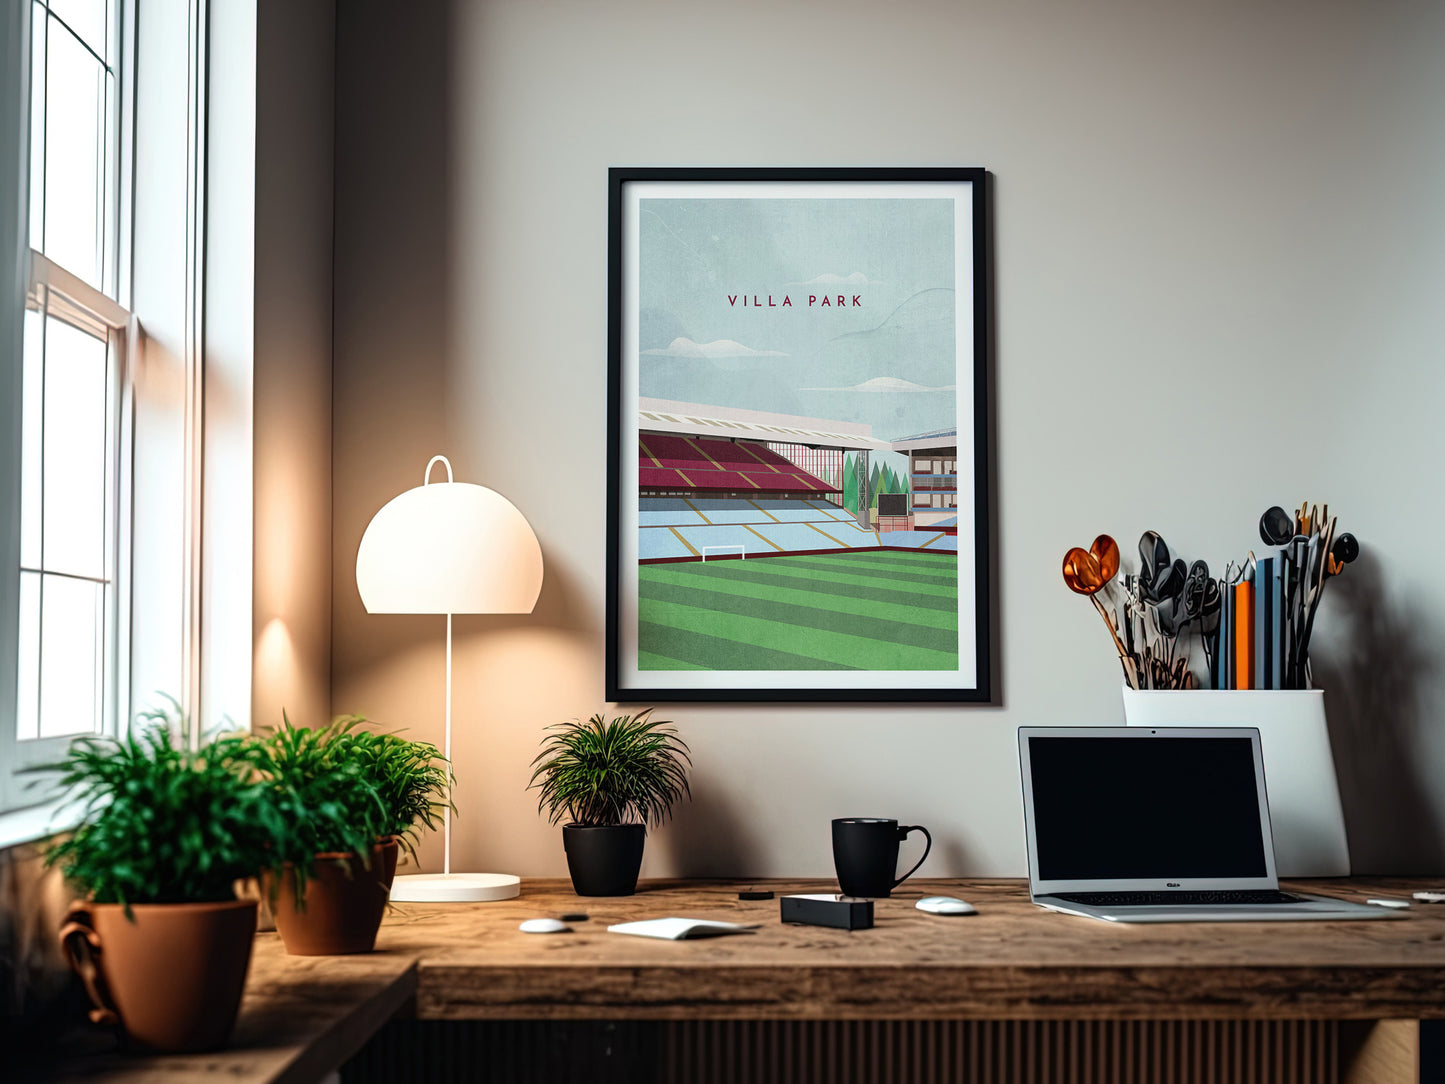 Aston V Football Gifts, Villa Park Stadium Art Print, Fathers Day Gift Ideas, Unique Gifts for Dads